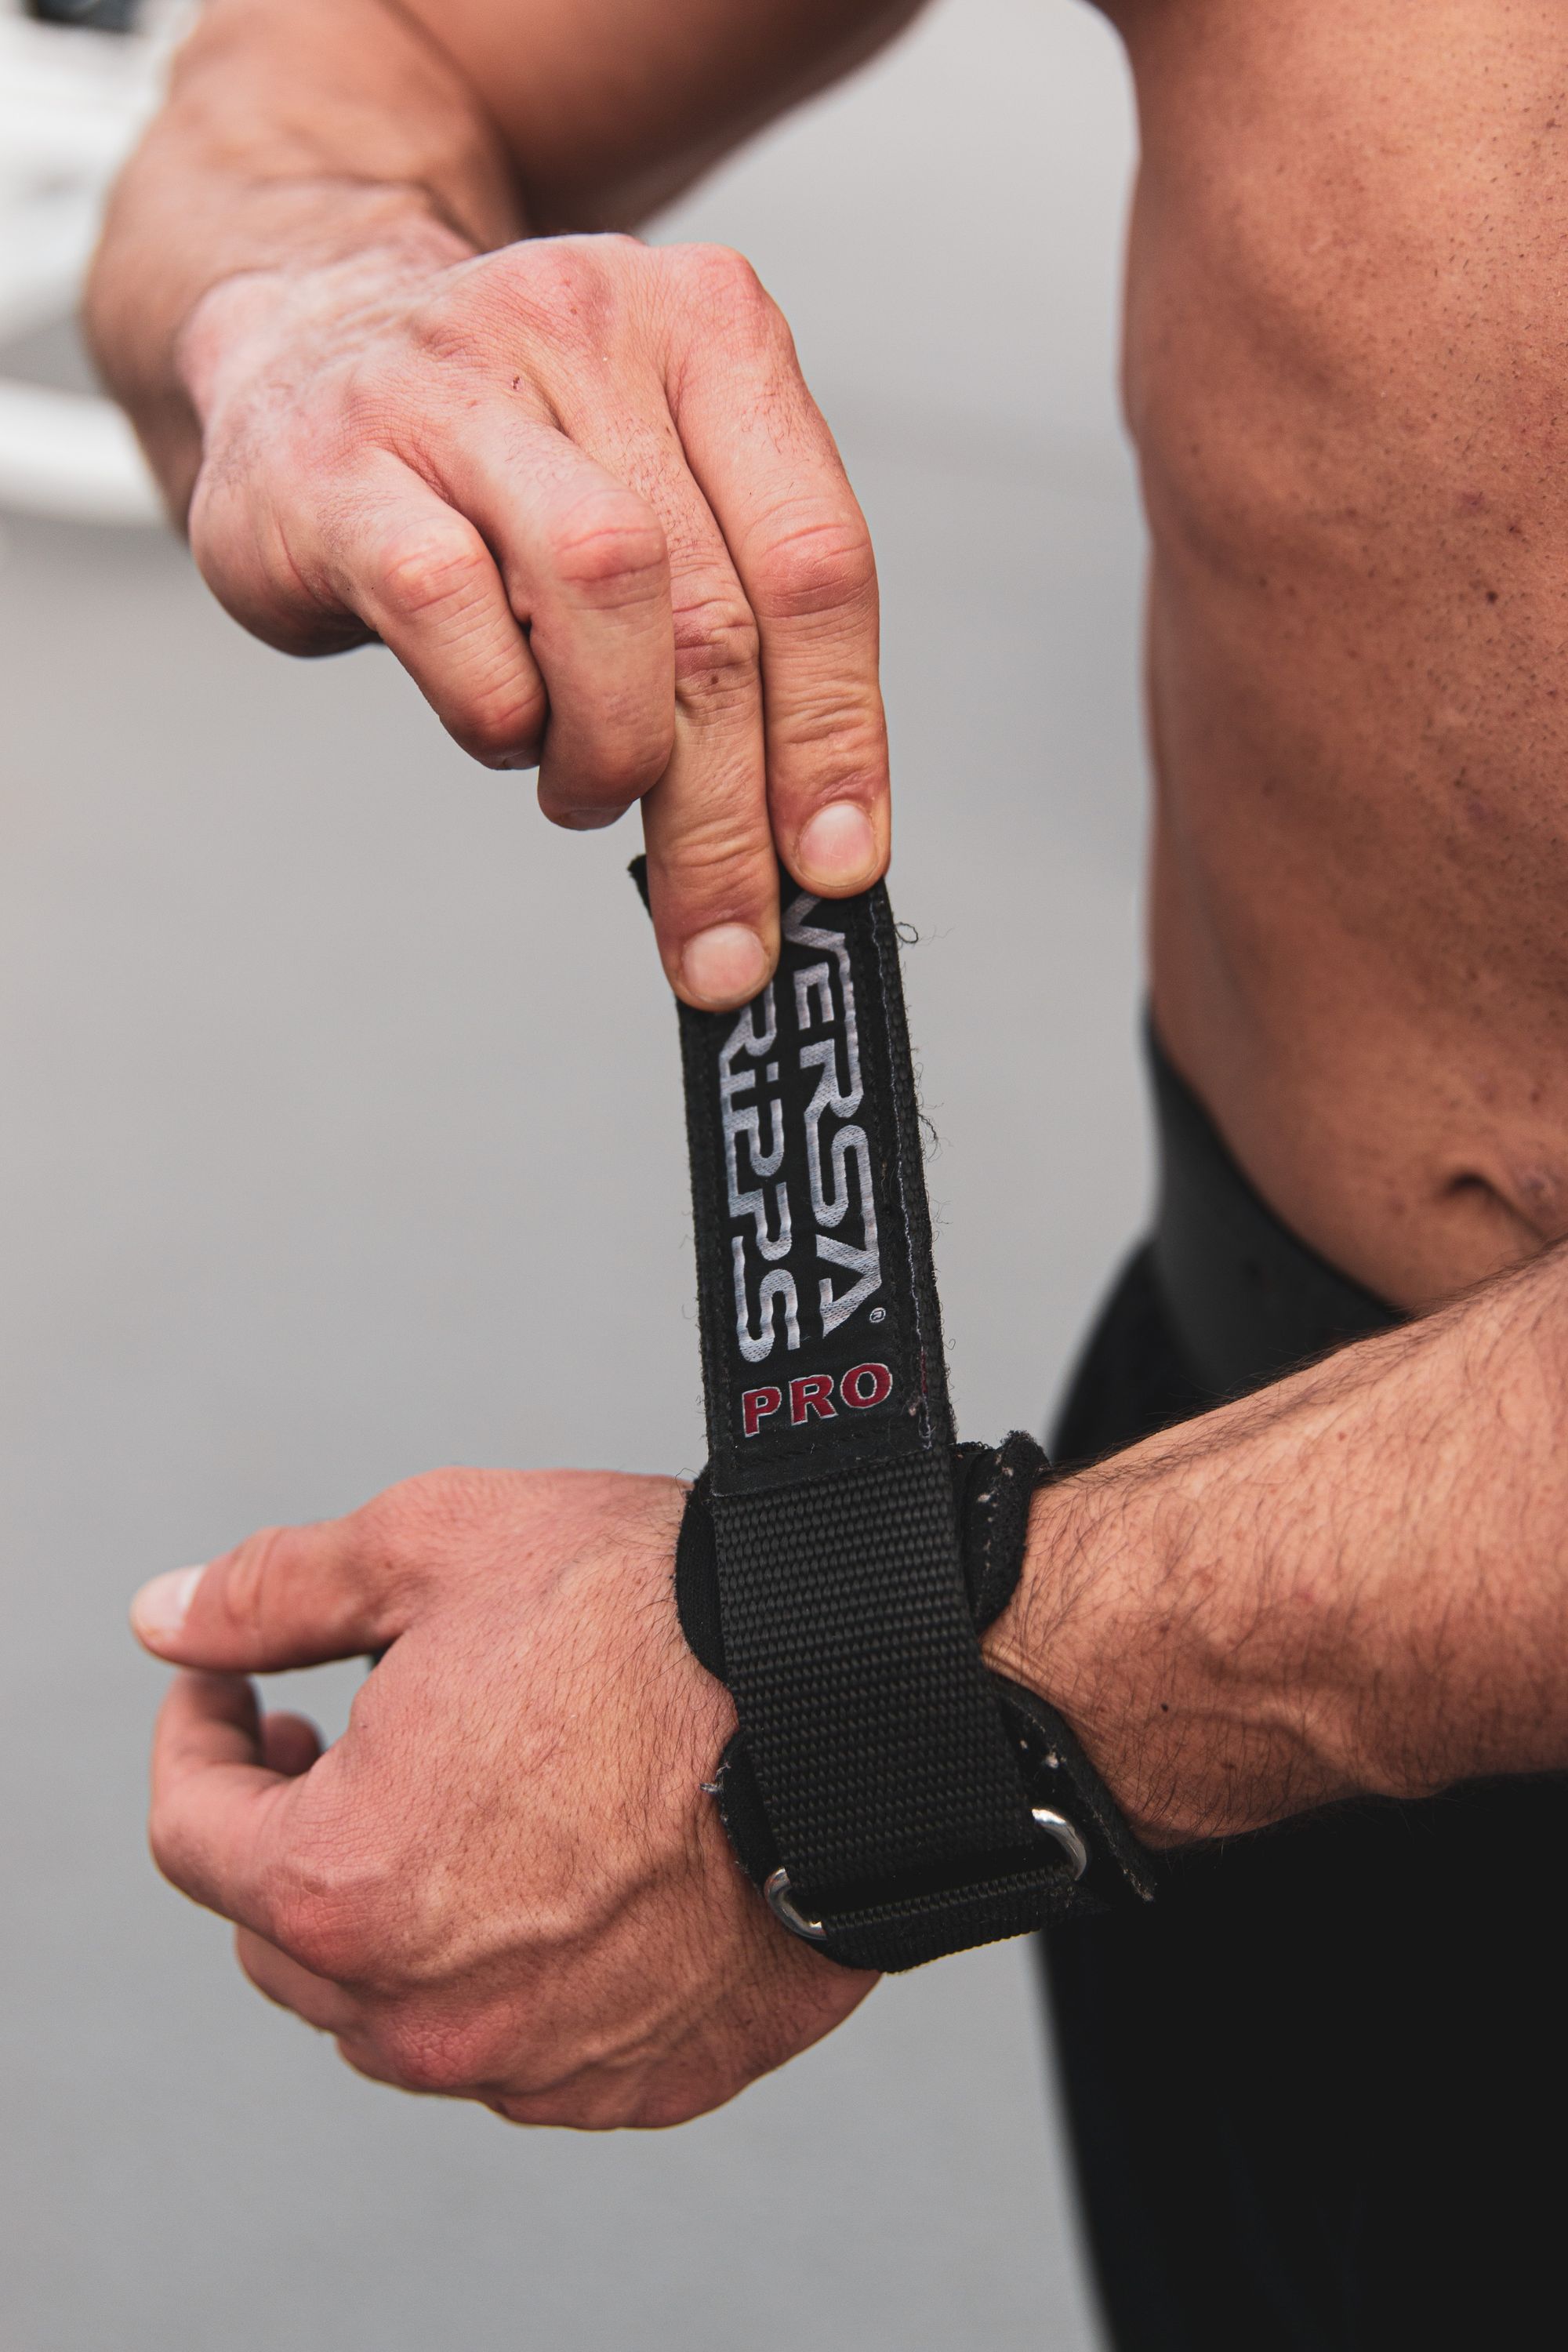 Wrist Exercise Equipment: Achieving Better Grip Strength and Flexibility